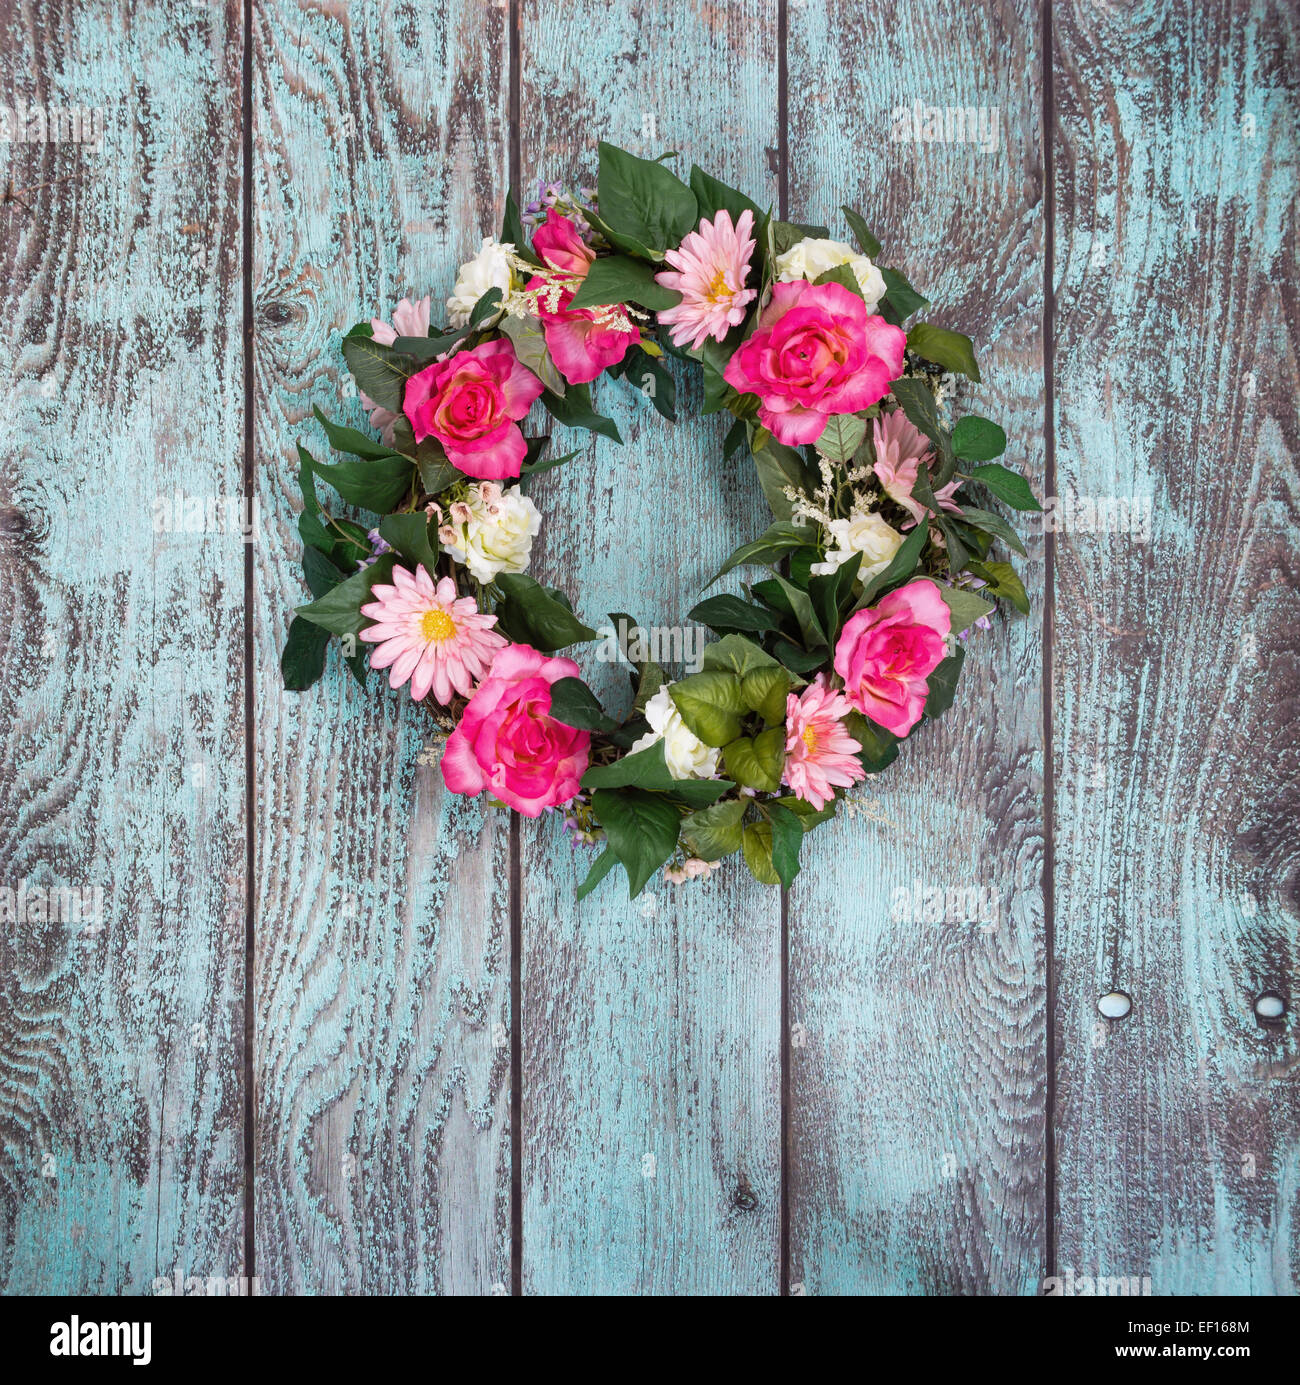 Floral wreath hanging against vintage green background Stock Photo